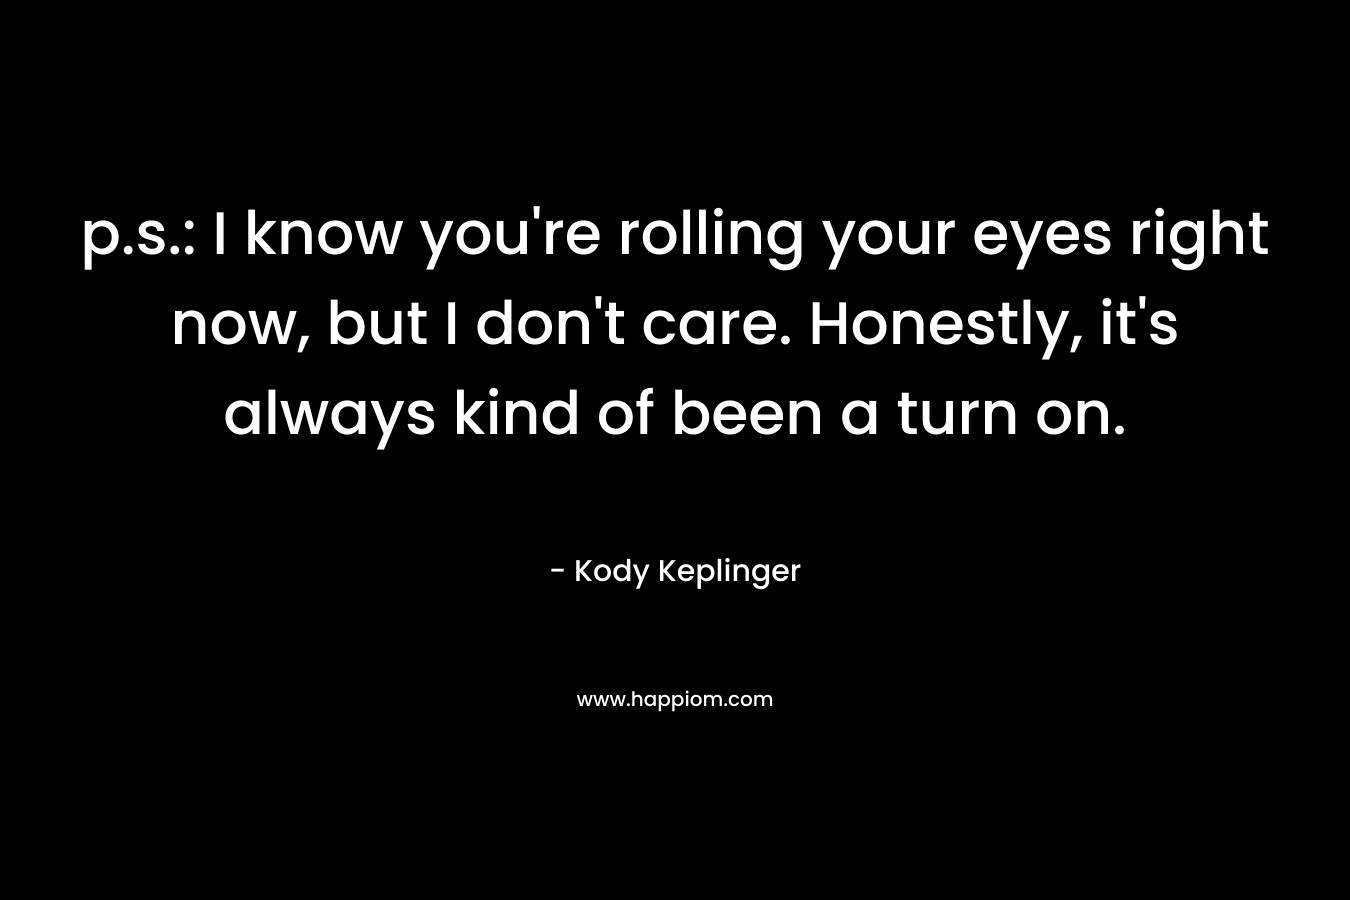 p.s.: I know you’re rolling your eyes right now, but I don’t care. Honestly, it’s always kind of been a turn on. – Kody Keplinger